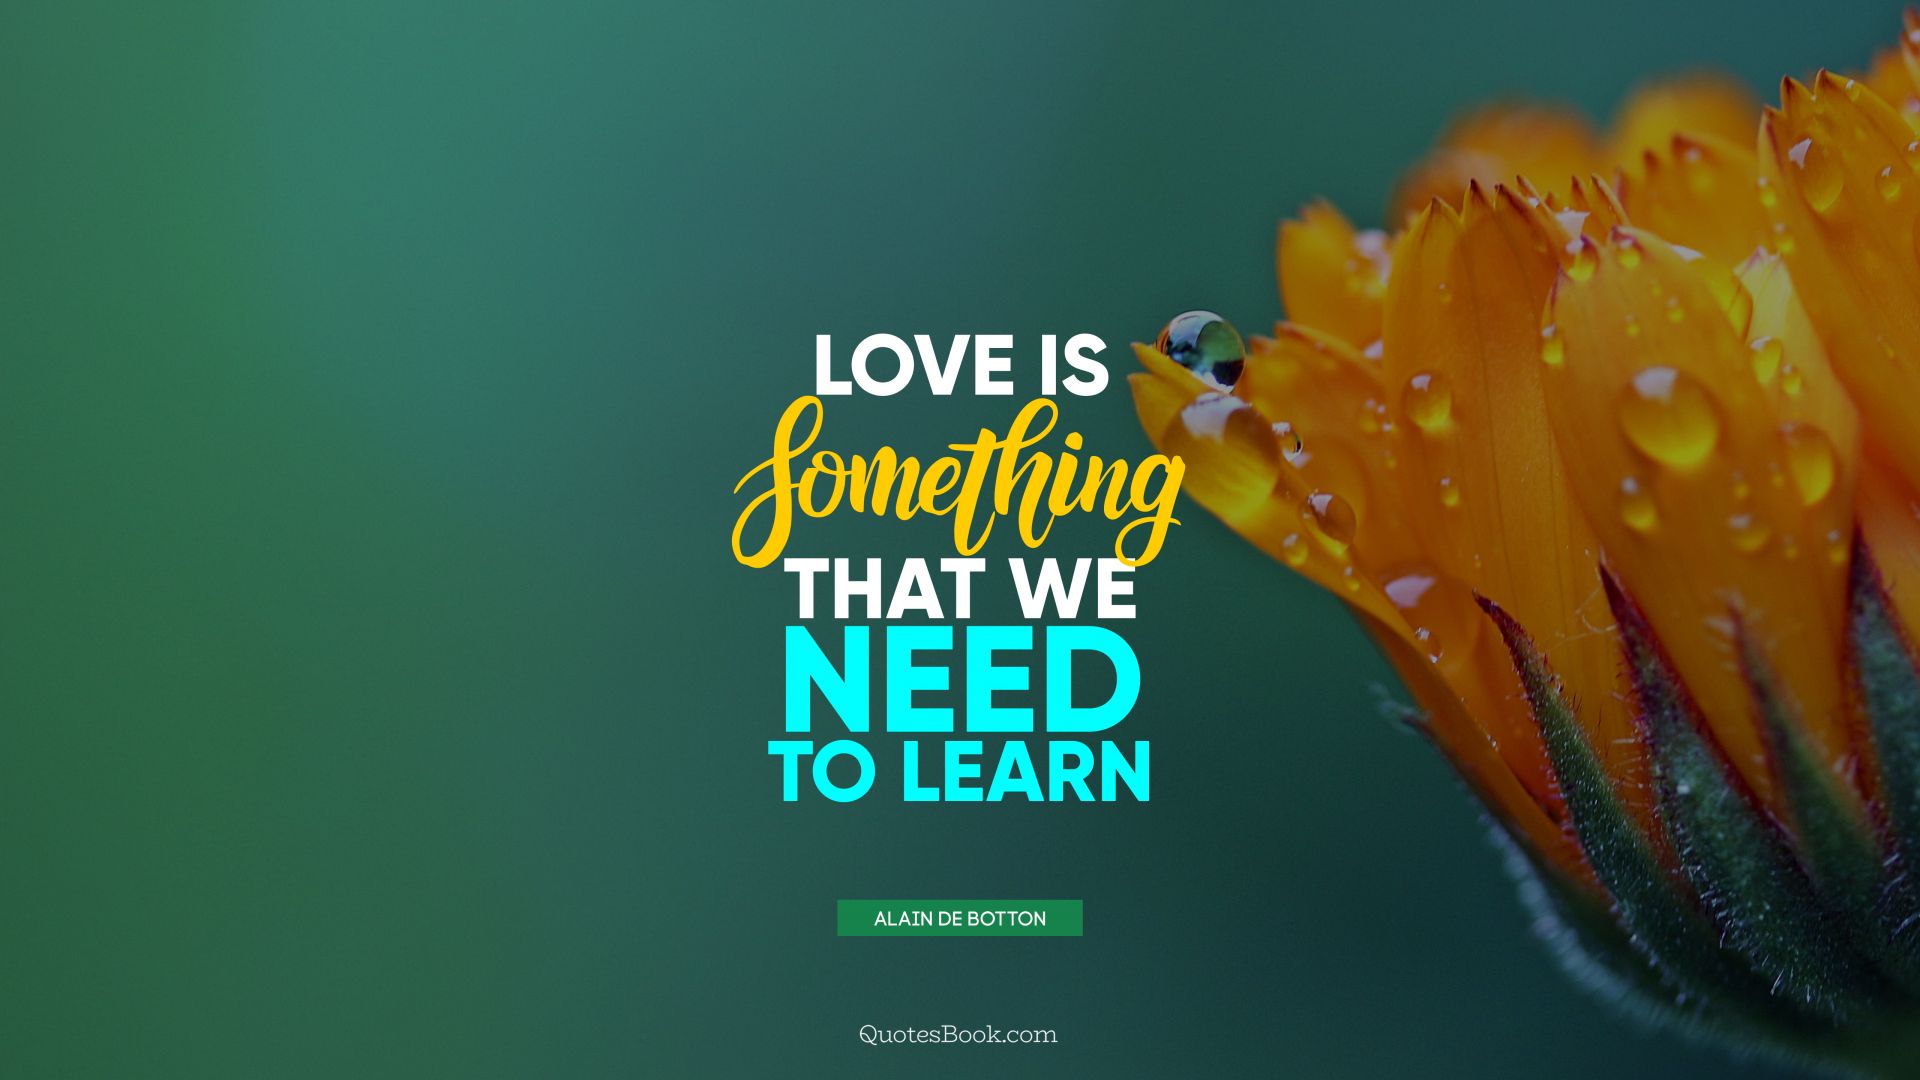 Love is something that we need to learn. - Quote by Alain de Botton